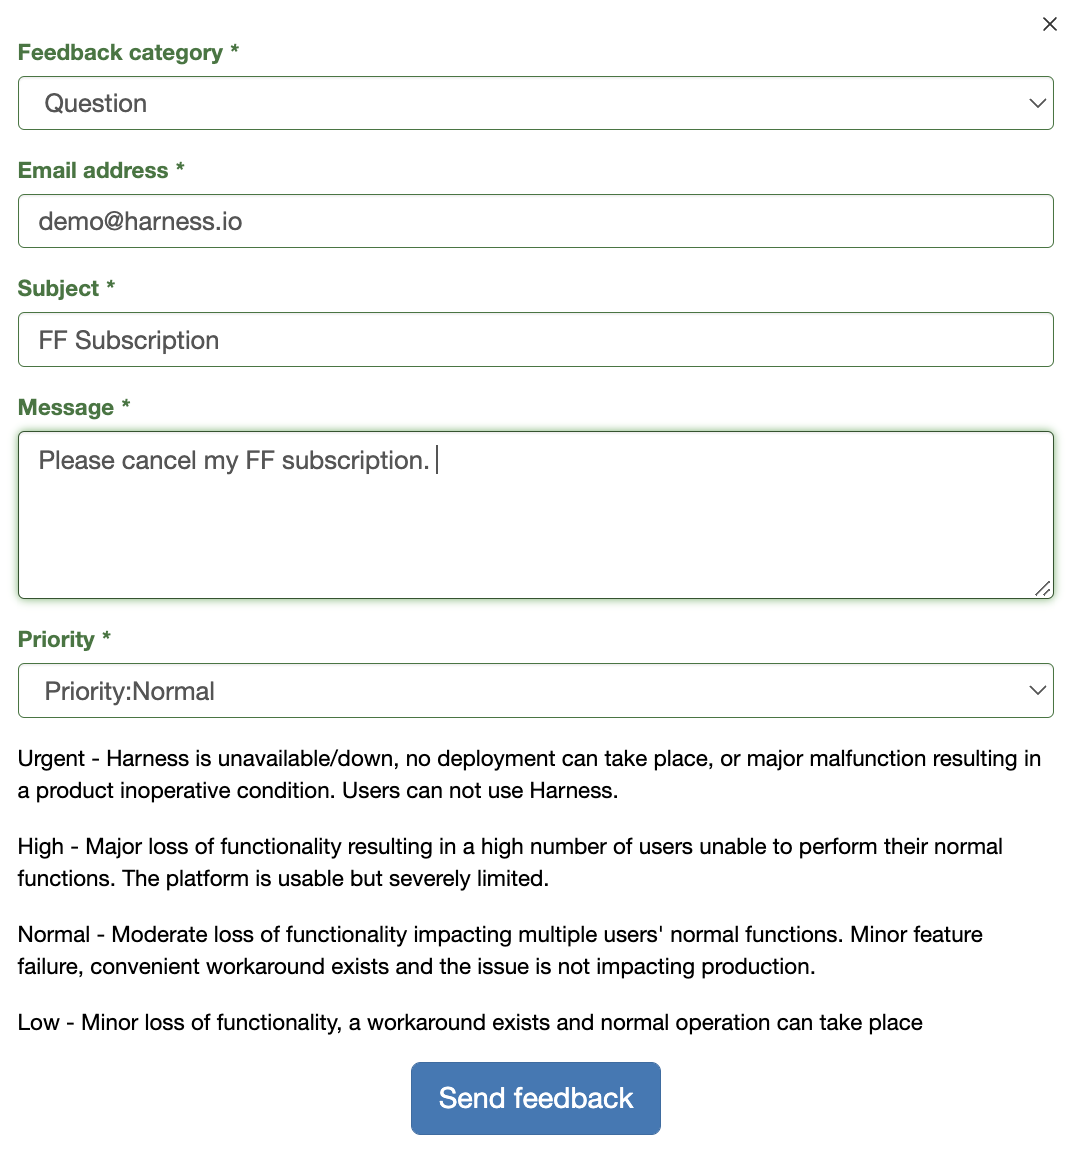 An example of the feedback form requesting cancellation.